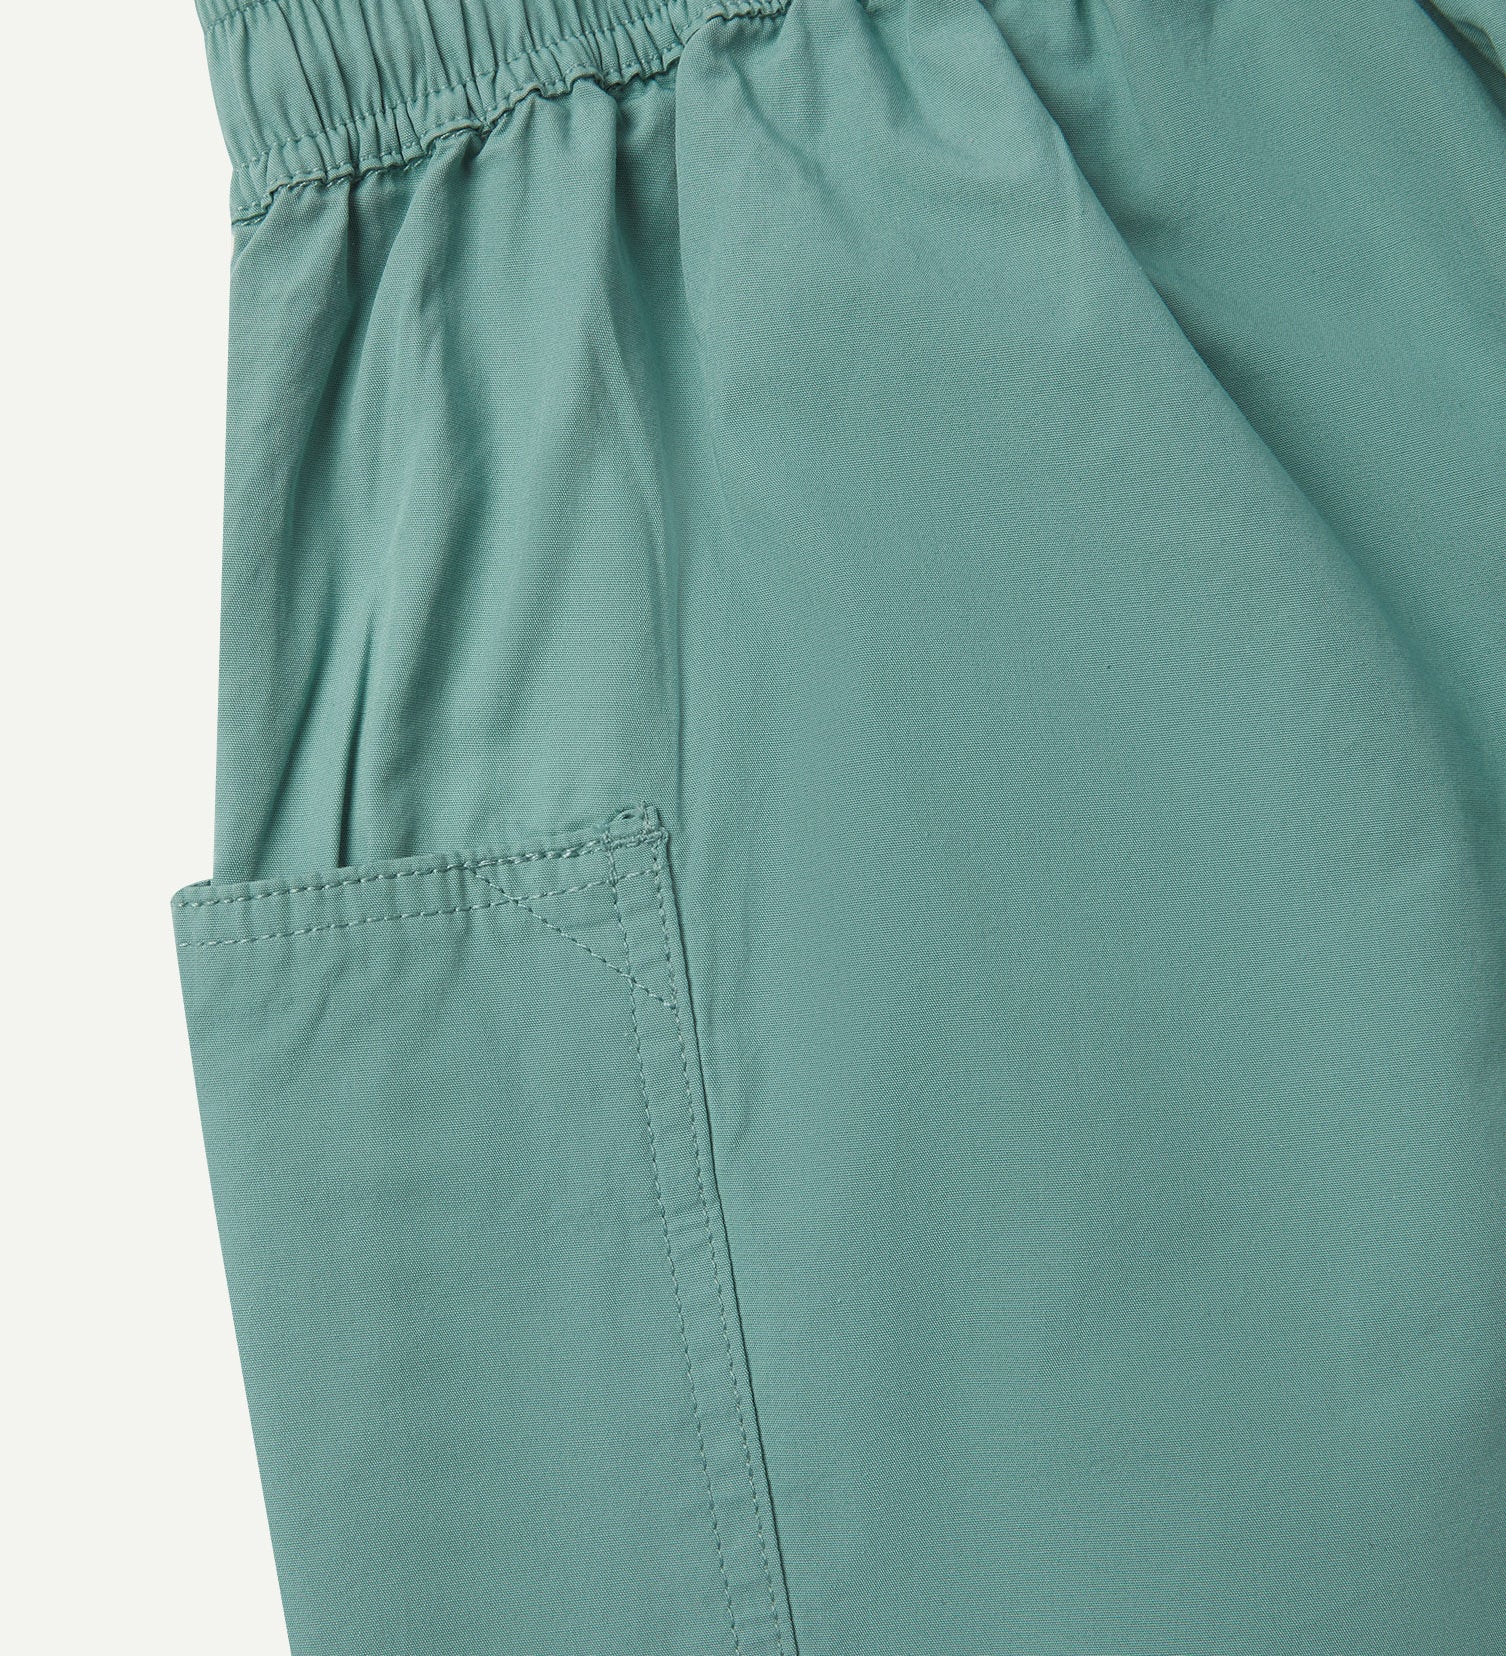 Back view of eucalyptus green organic cotton #5015 lightweight cotton shorts by Uskees. Clear view of elasticated waist